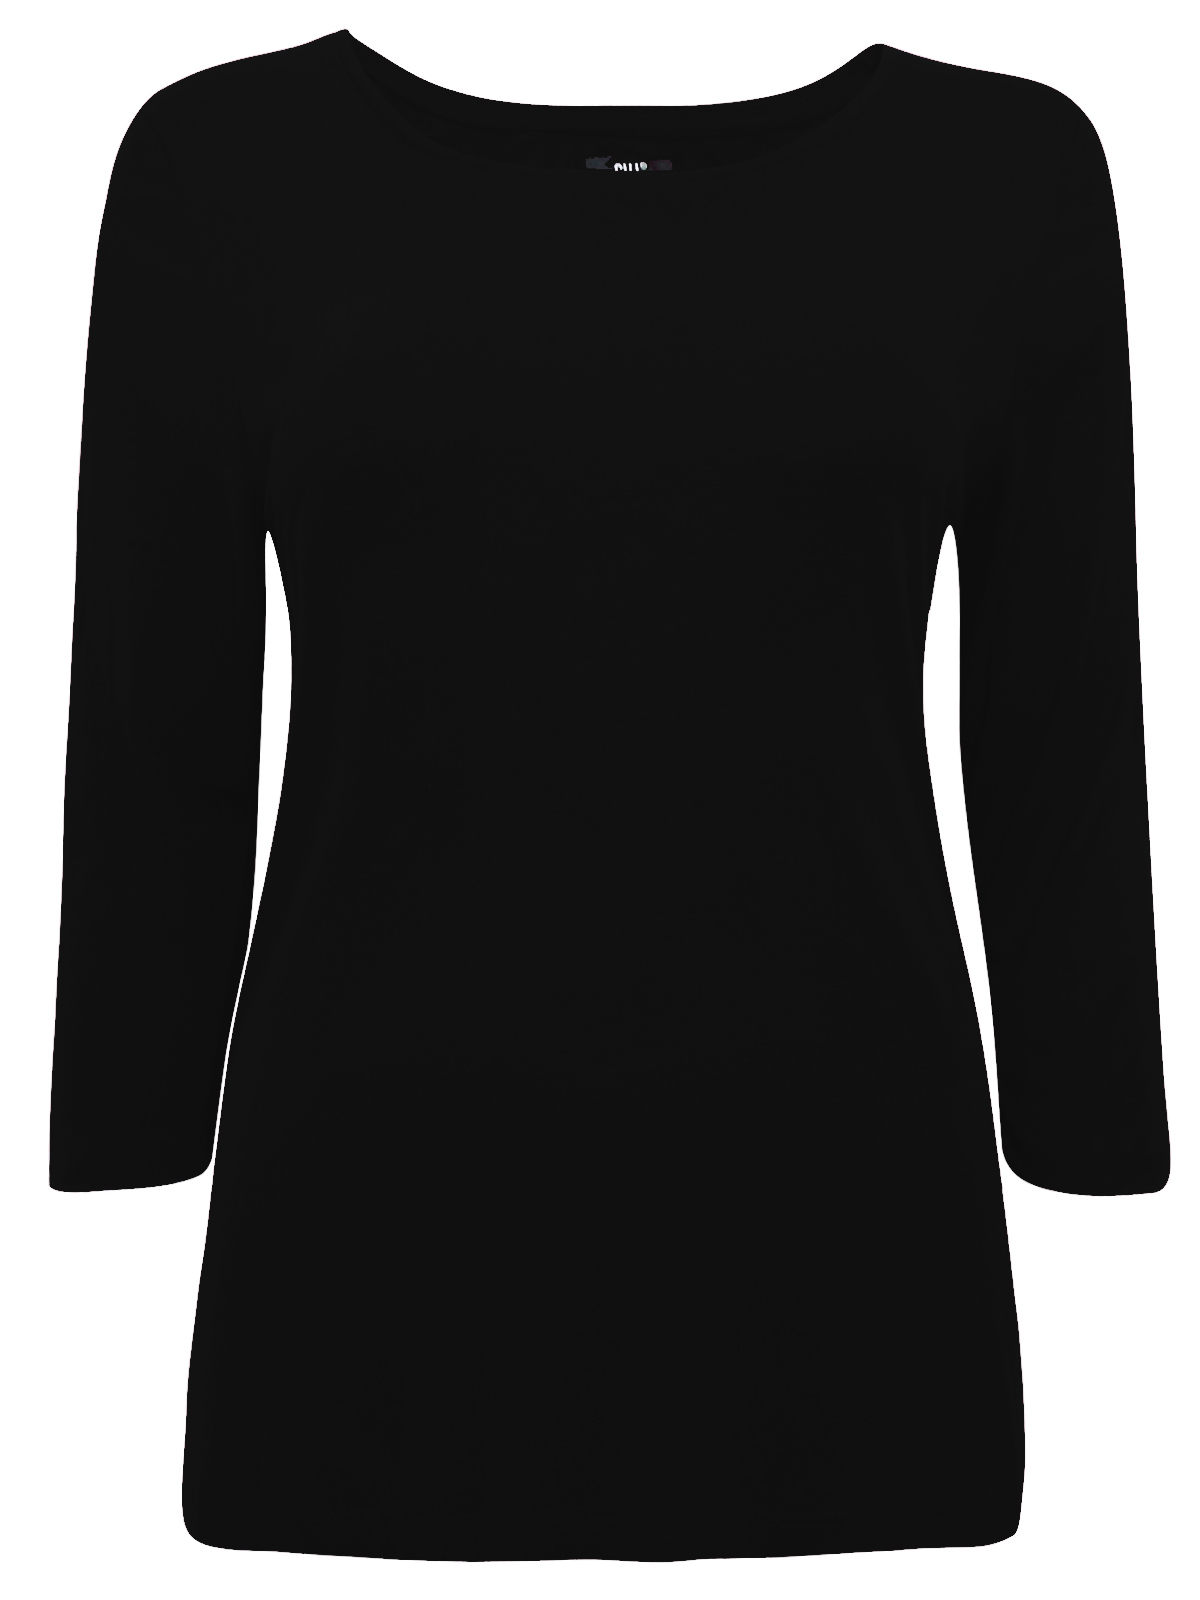 Gill - - Gill BLACK Scoop Neck 3/4 Sleeve Jersey Top - Size 10/12 to 22 ...